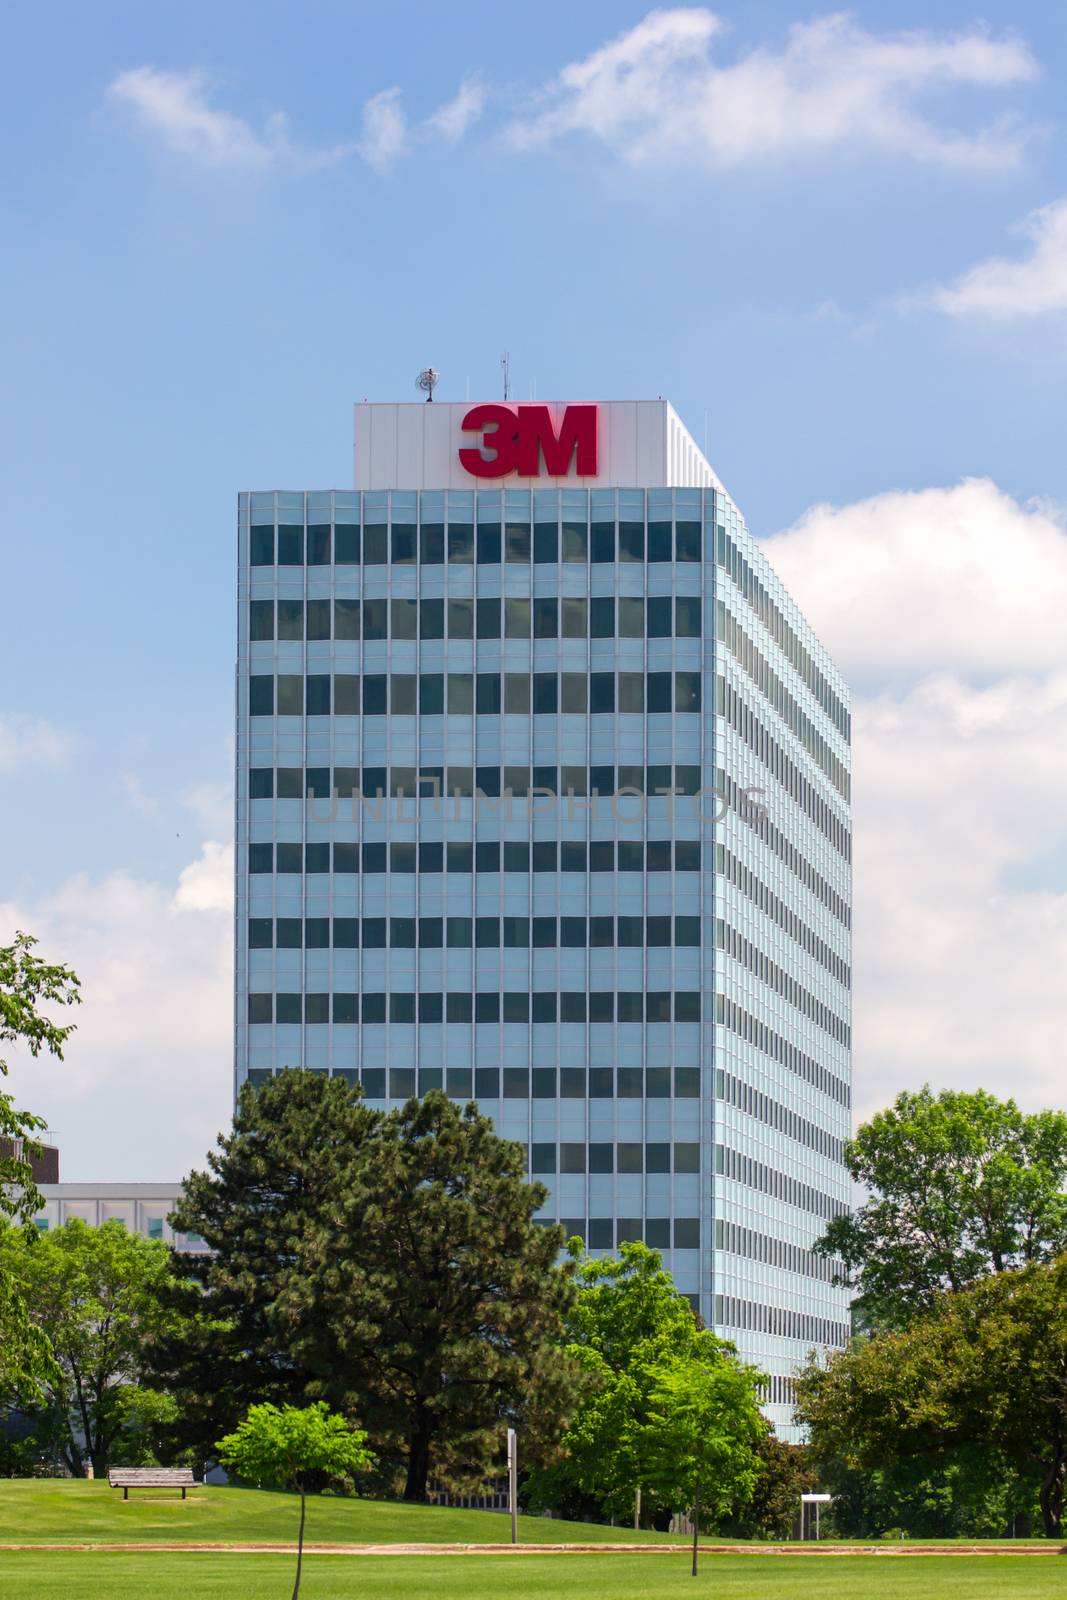 3M Corporate Headquarters Building by wolterk